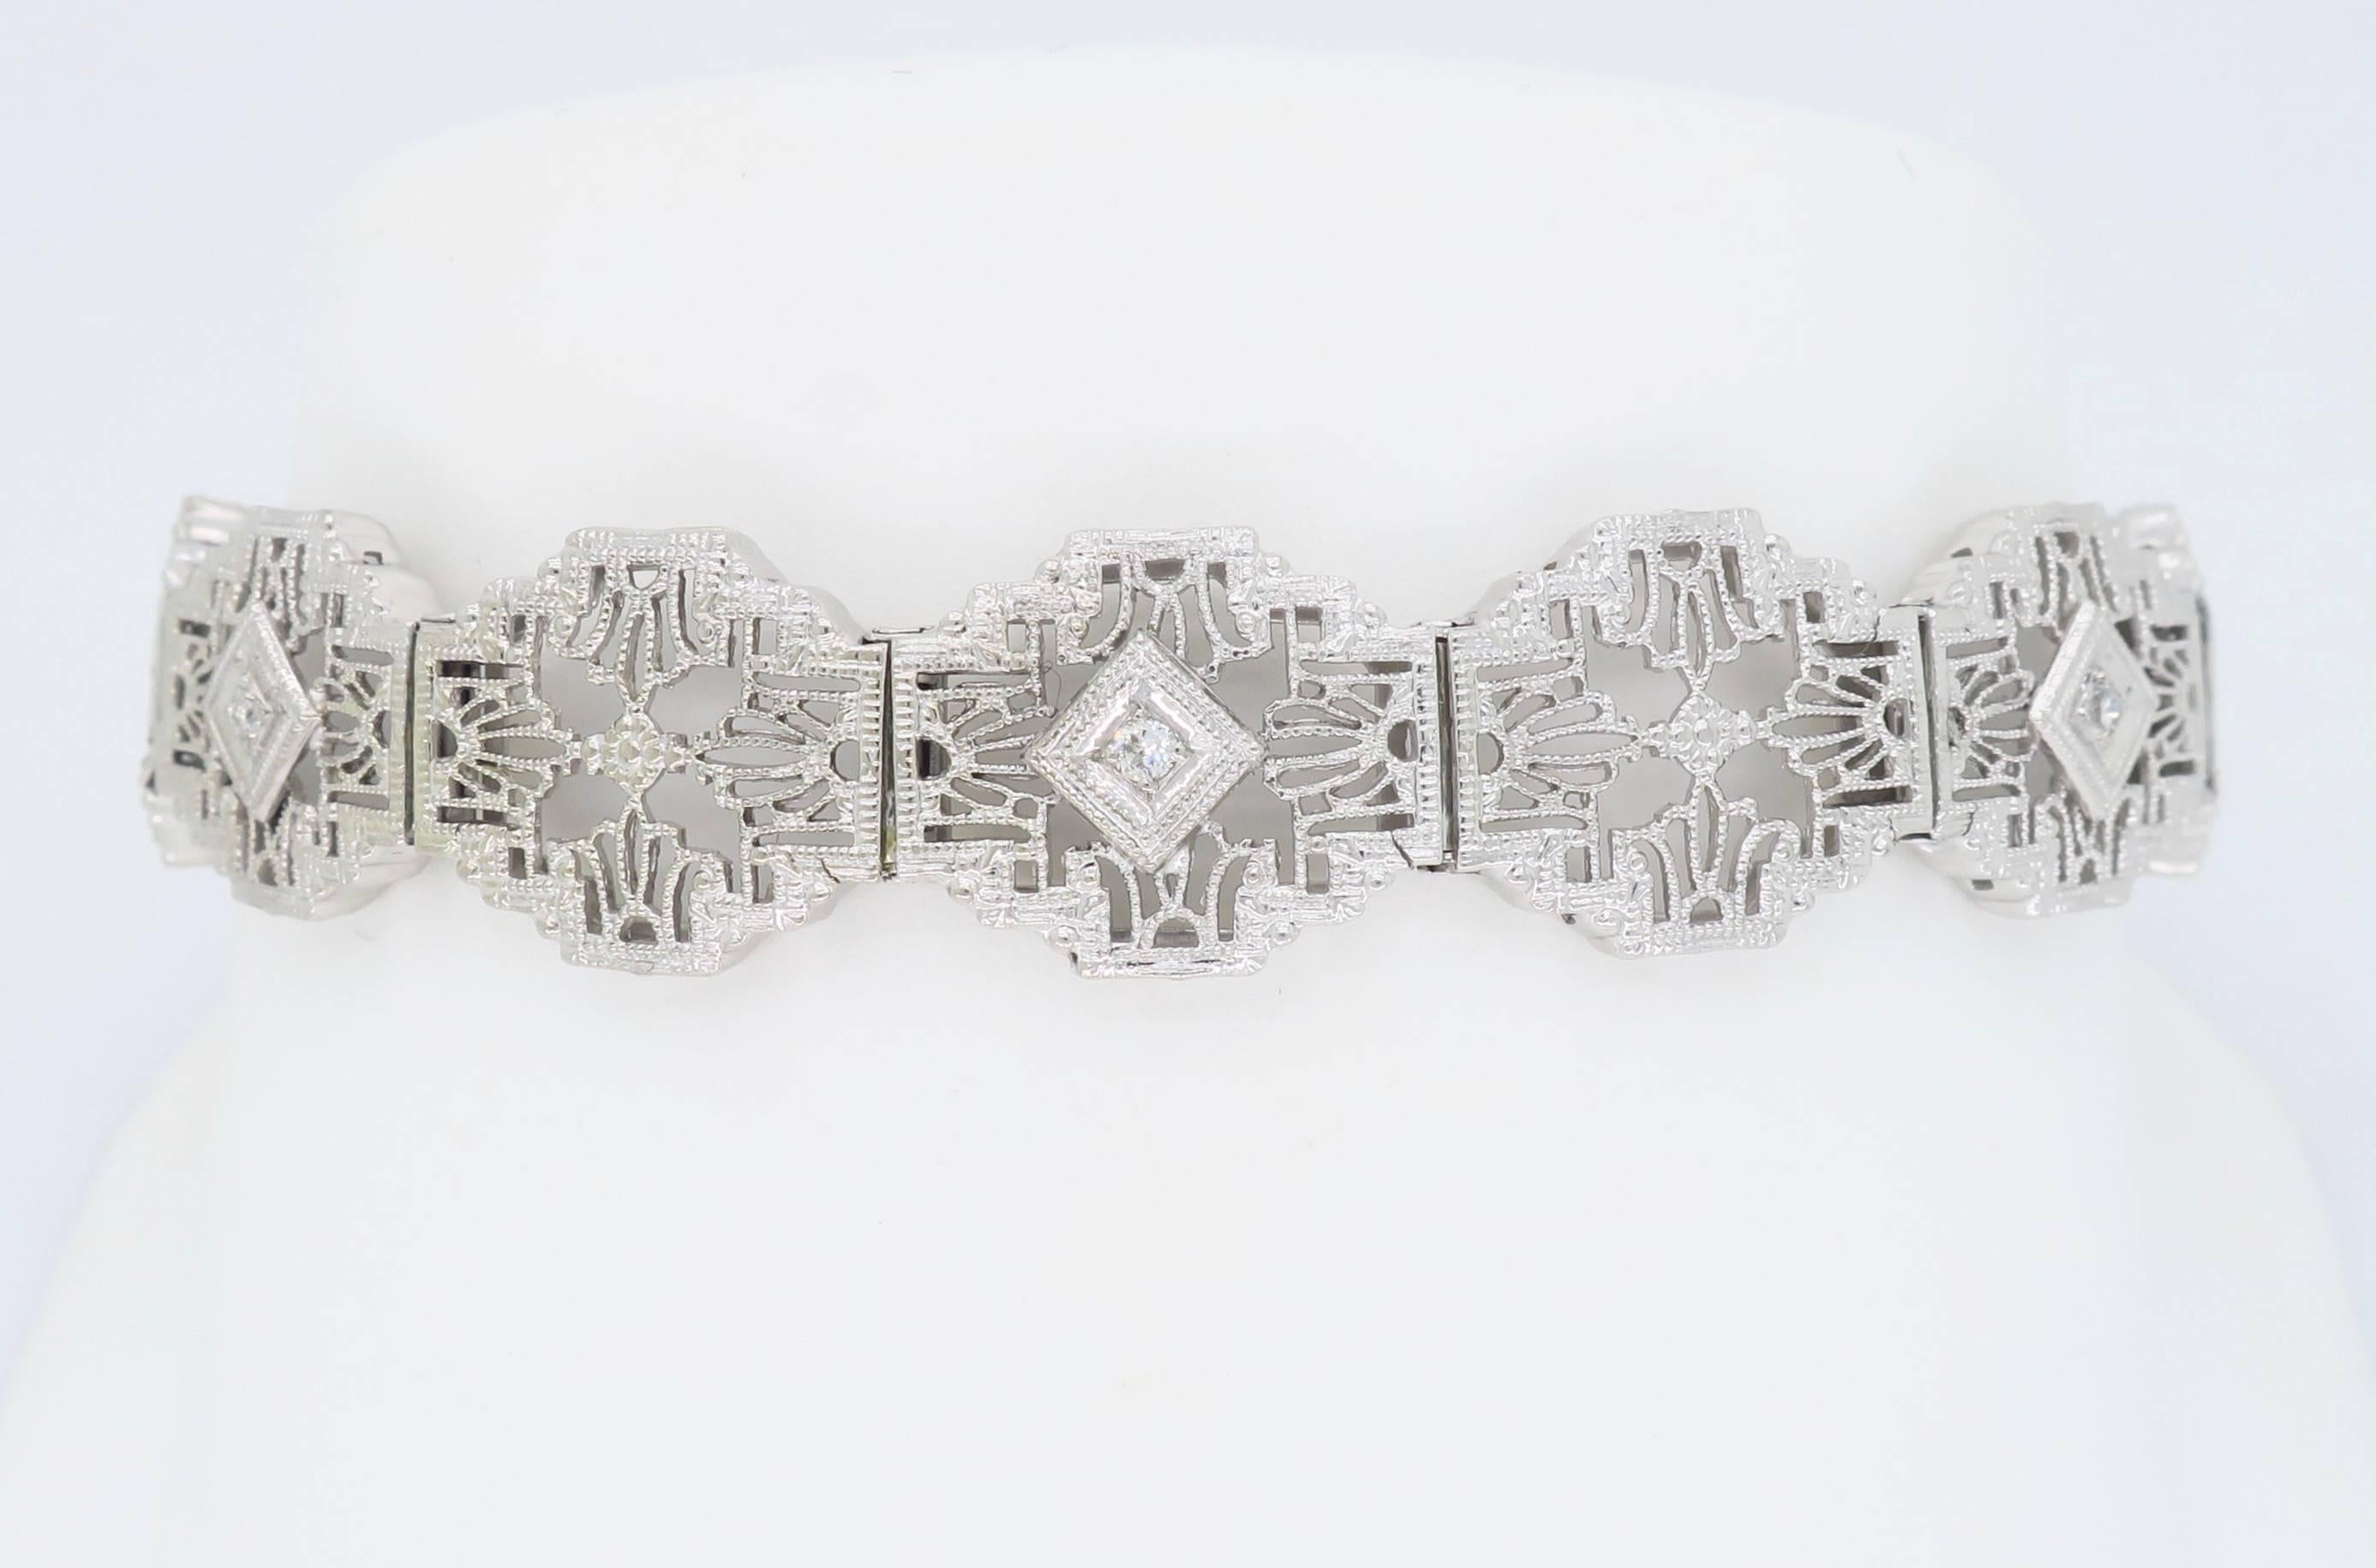 Stunning White Gold Filigree Bracelet with Ornate Detail and Diamond Accents

Gemstone: Three Diamond Accents
Metal: 14K White Gold
Marked/Tested: Stamped “14K” 
Weight: 9.7 Grams
Bracelet Length: 7” 